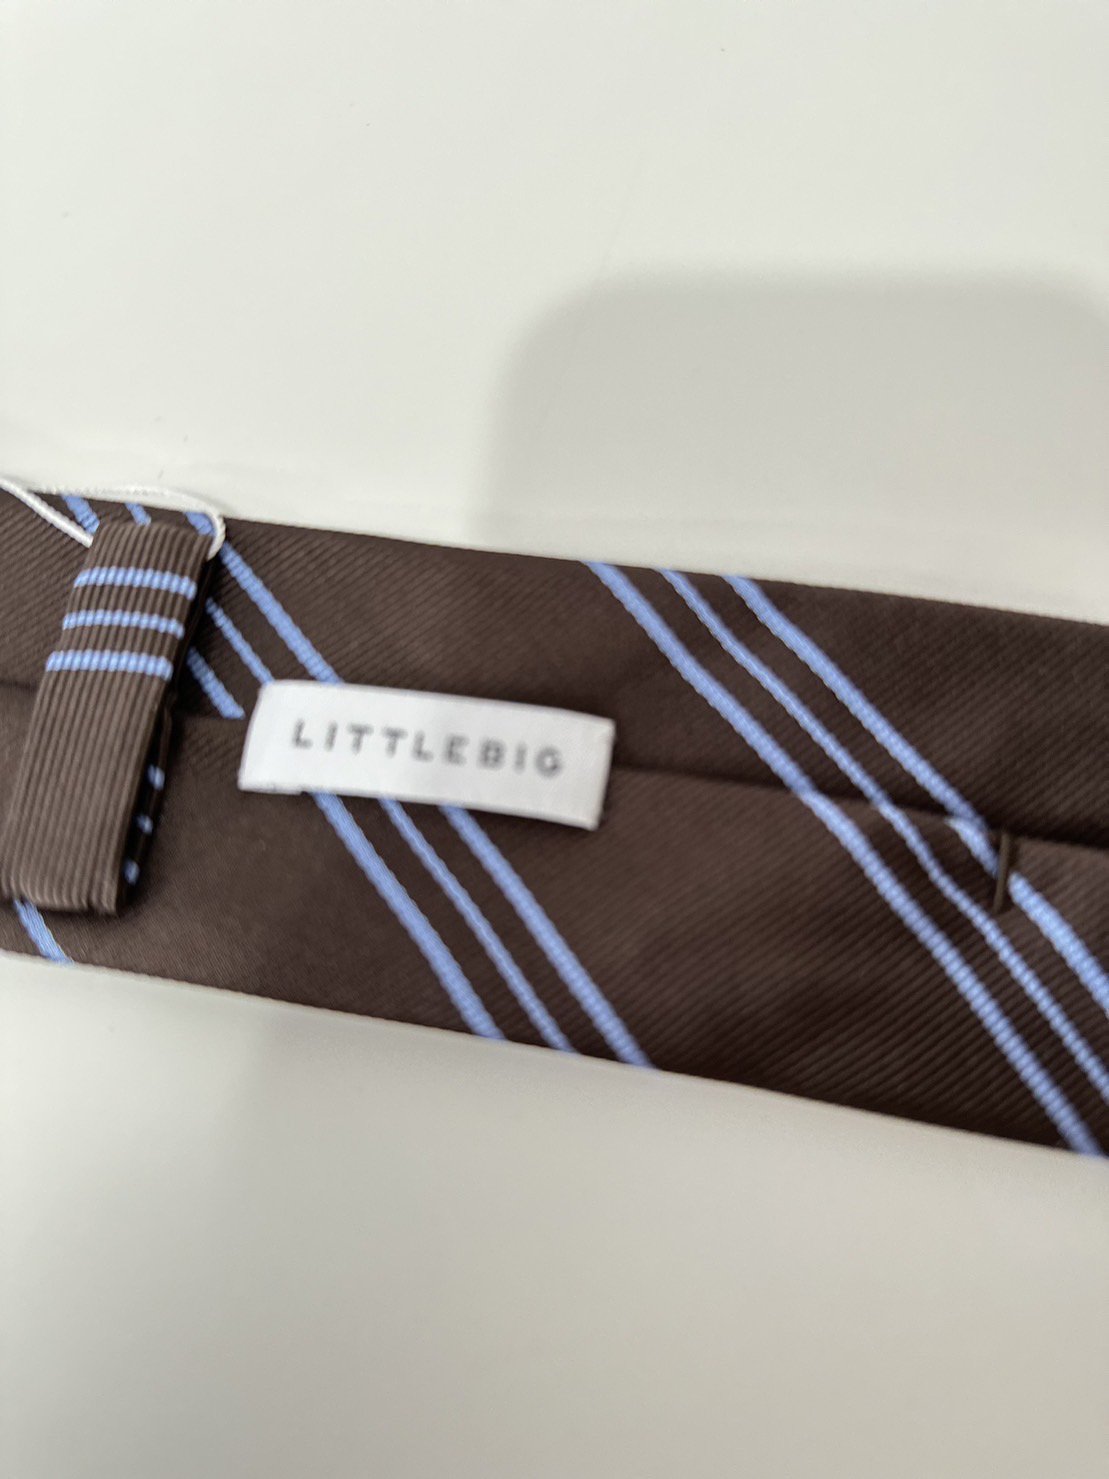 LITTLEBIG<br />Resimental Tie 2 / Brown&Blue<img class='new_mark_img2' src='https://img.shop-pro.jp/img/new/icons14.gif' style='border:none;display:inline;margin:0px;padding:0px;width:auto;' />